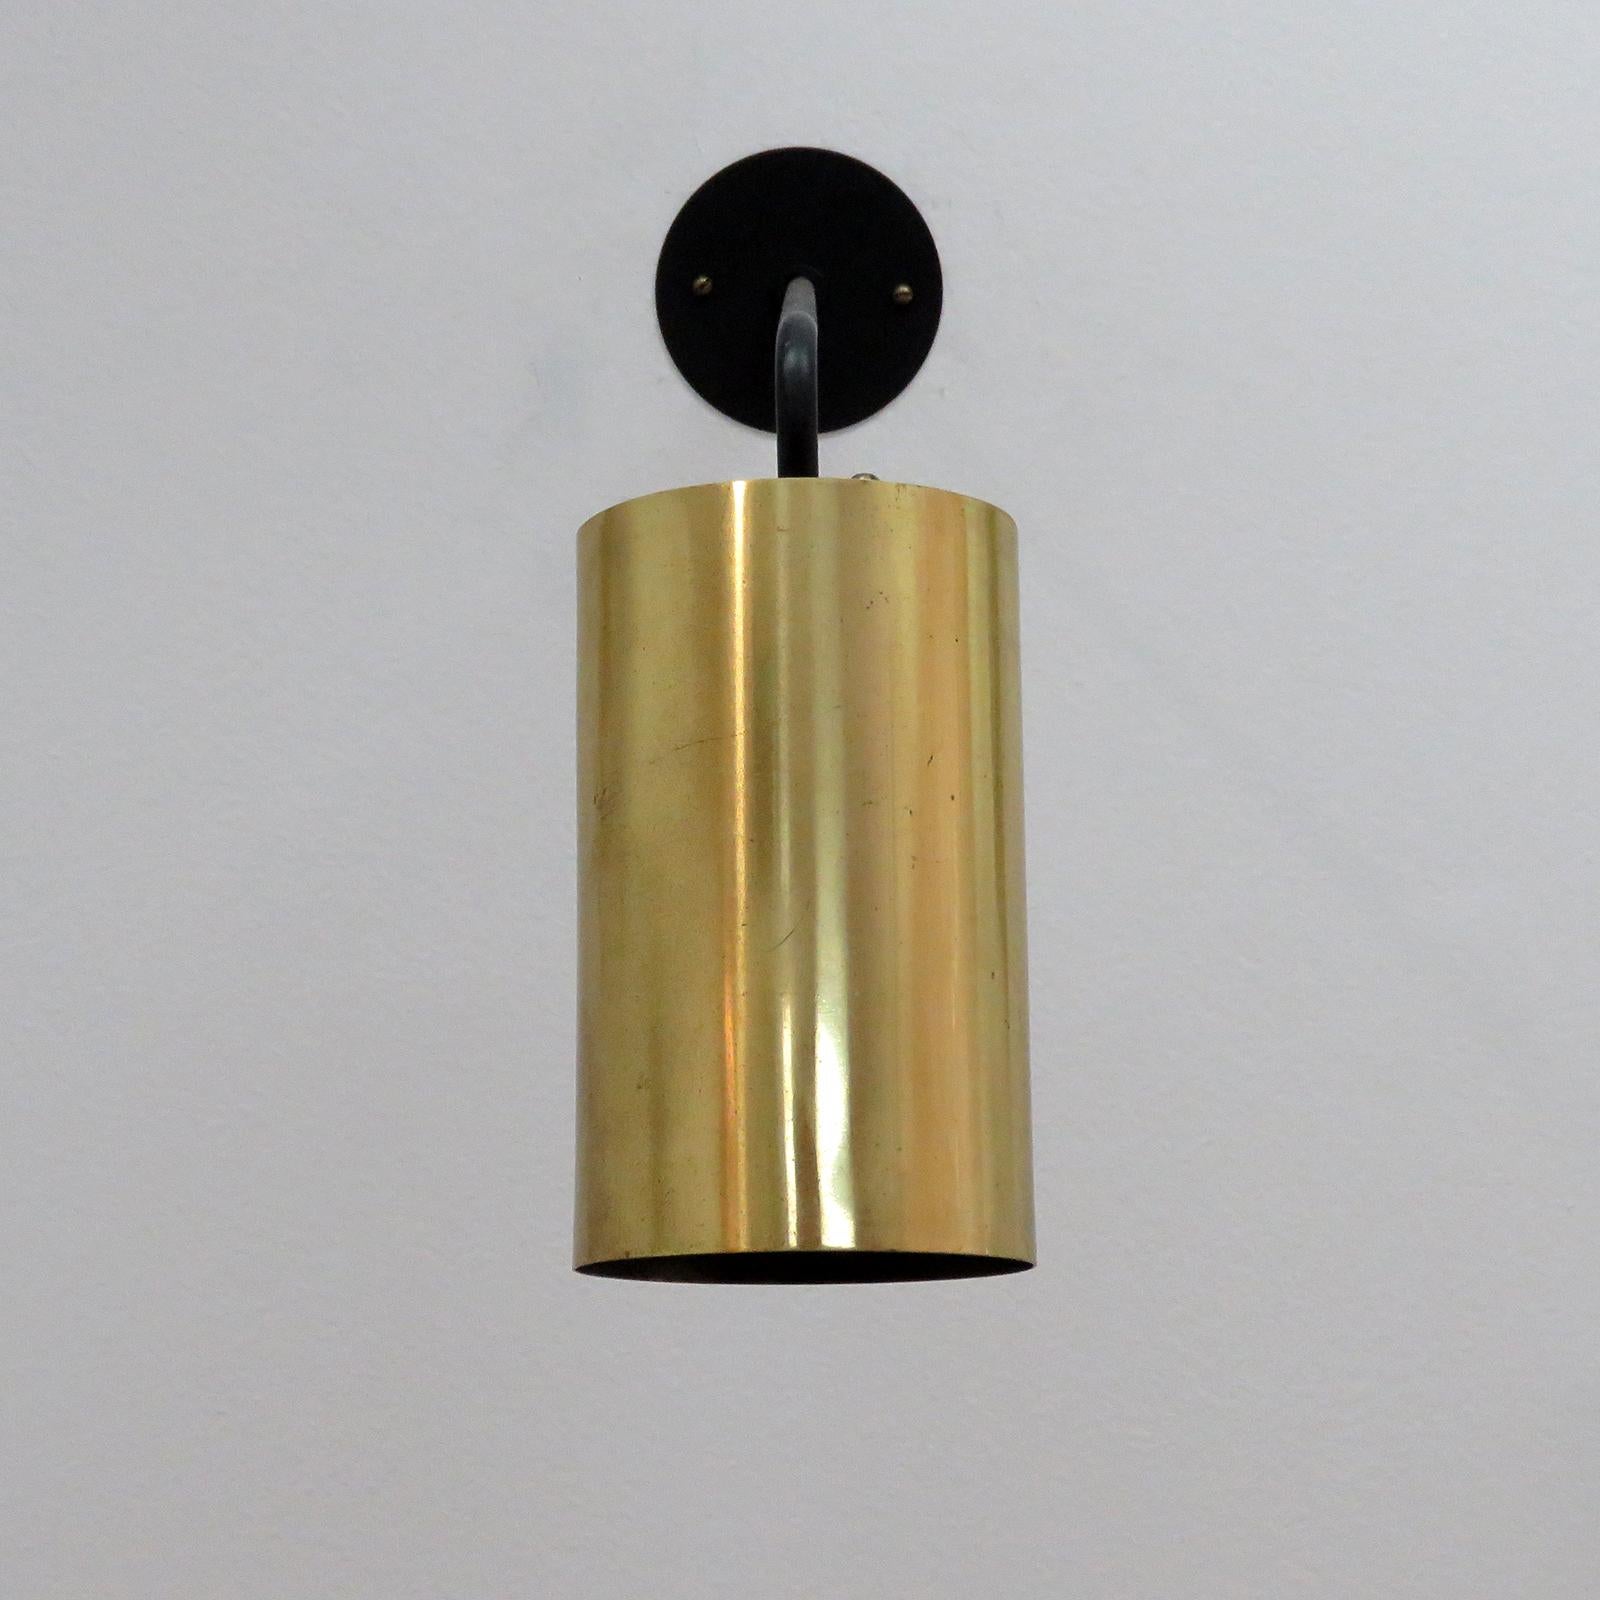 Great understated French wall light by Parscot, with brass cylinder adjustable via a ball joint on a long black enameled arm, can be used as wall or ceiling mount, wired for US standards, one E27 socket, max. wattage 100w or LED equivalent,